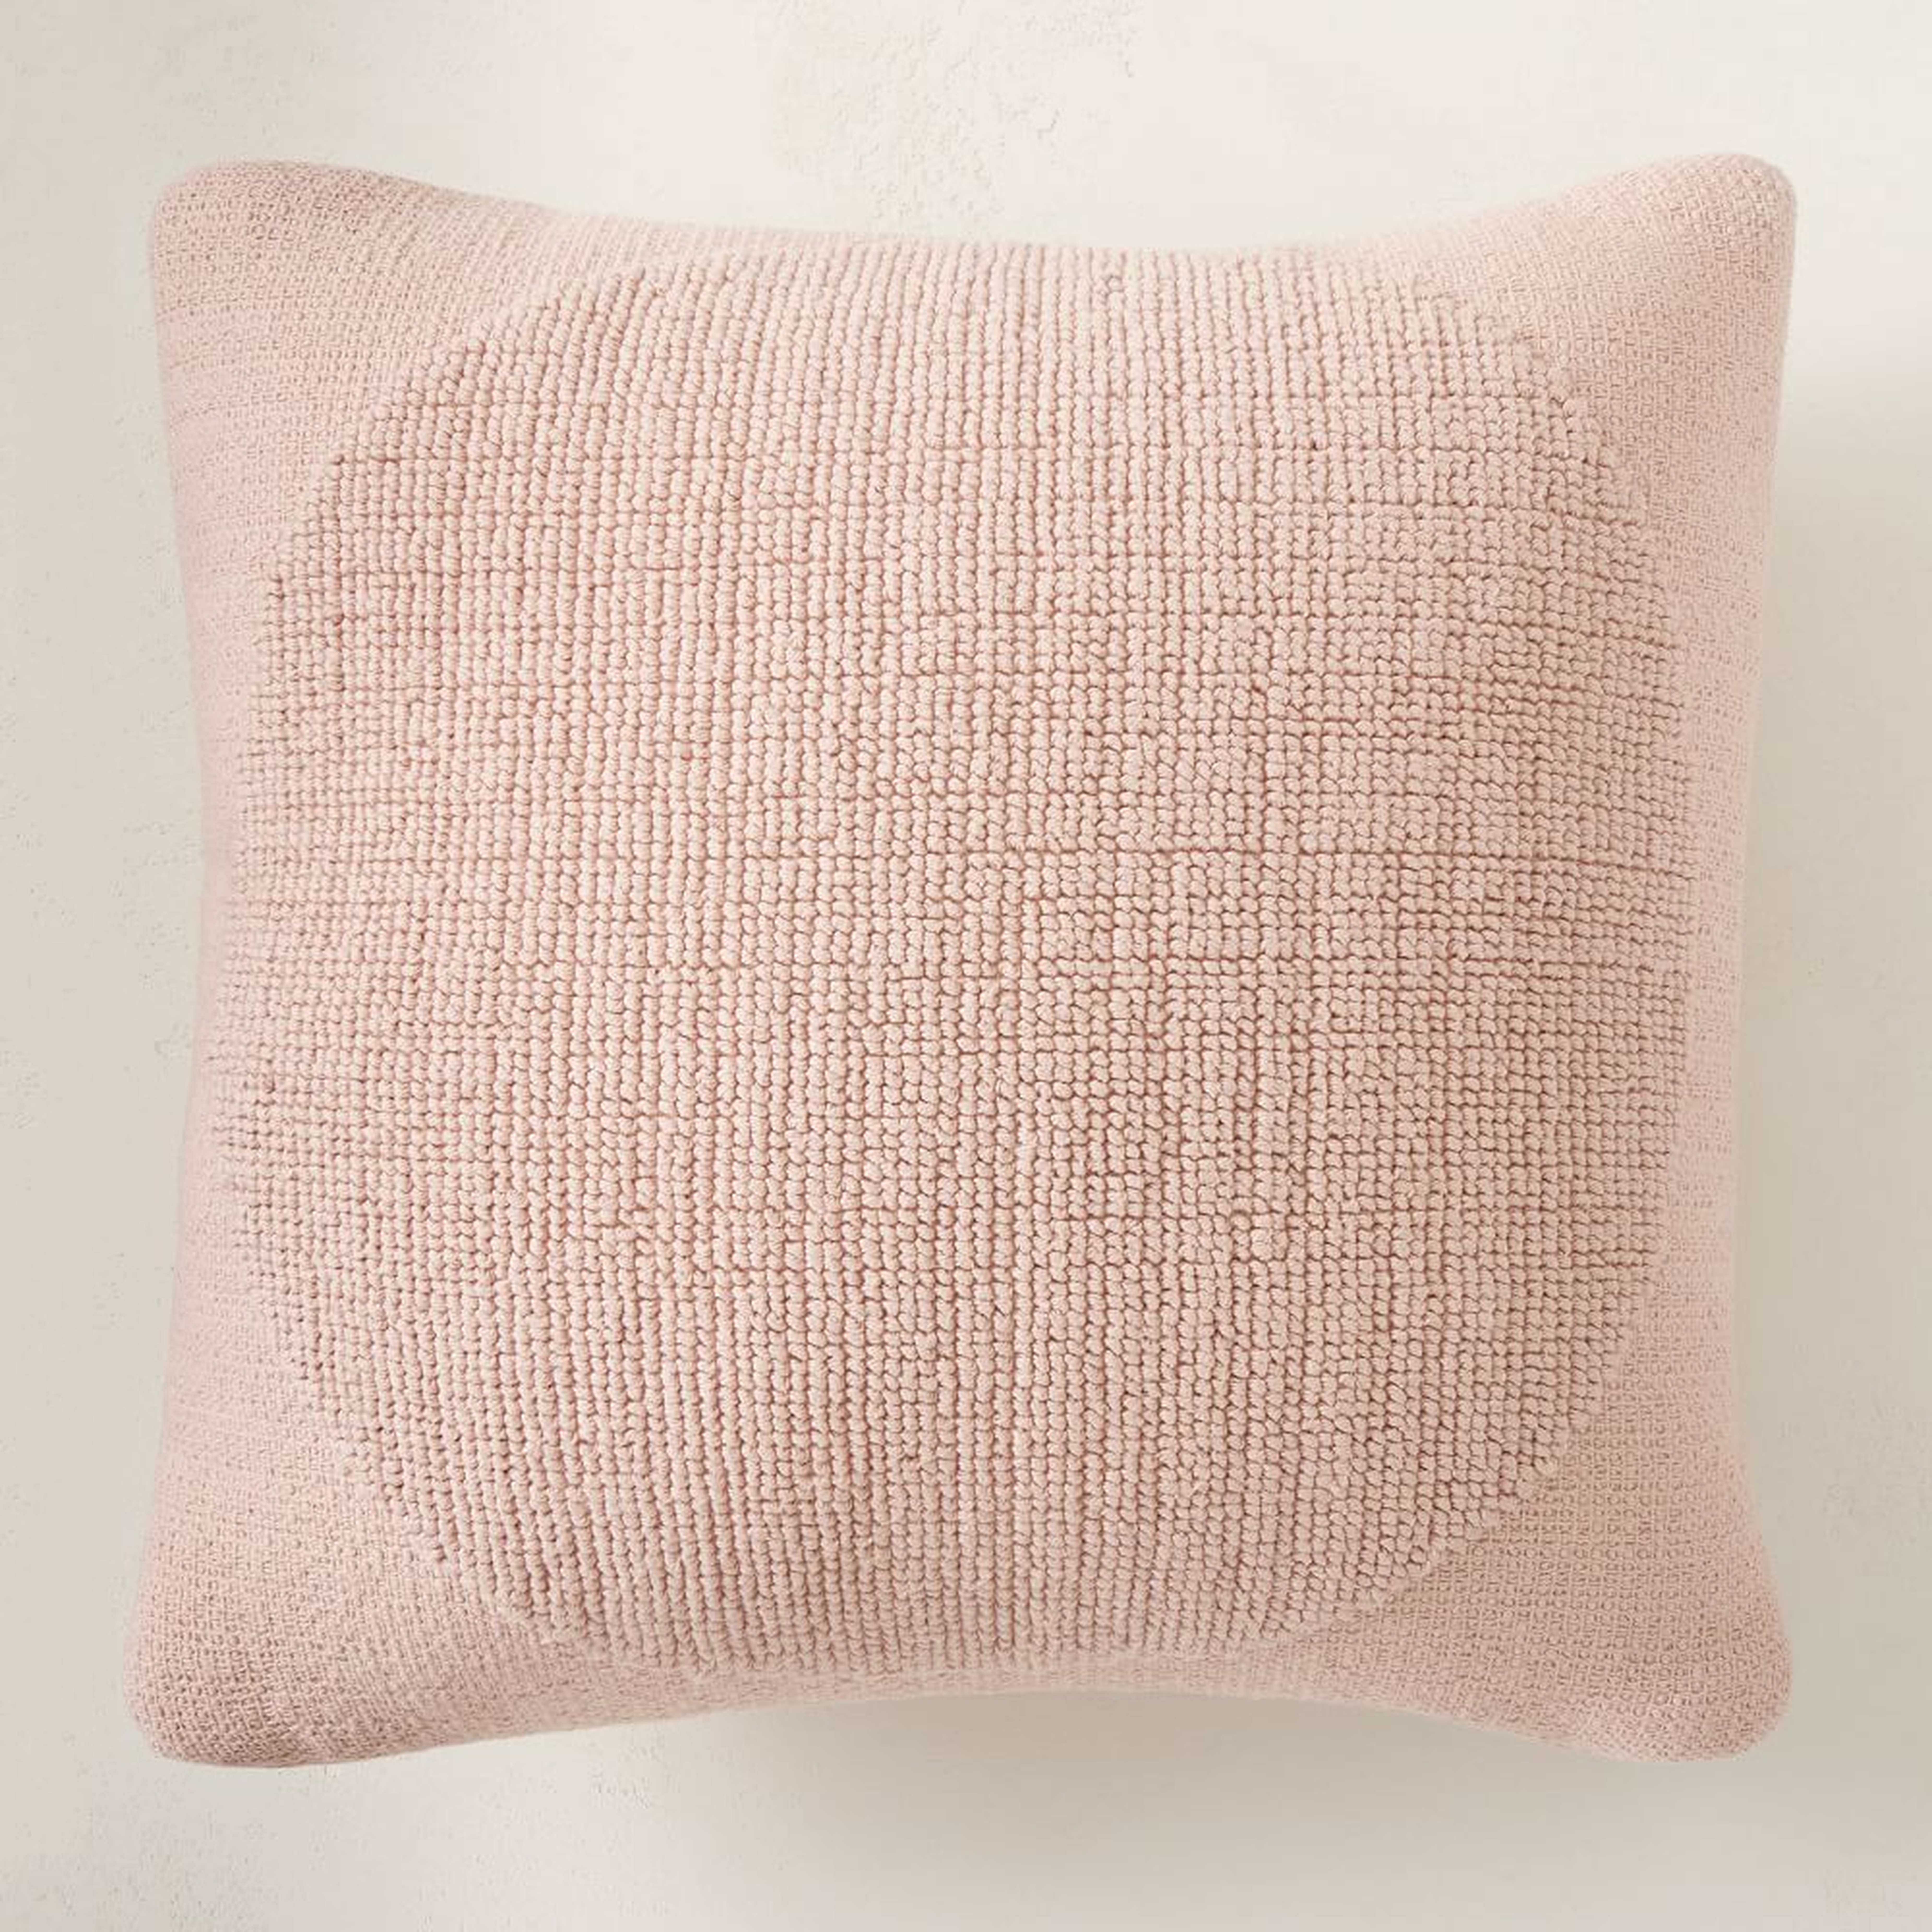 Outdoor Tufted Circle Pillow, 20"x20", Pink Stone - West Elm